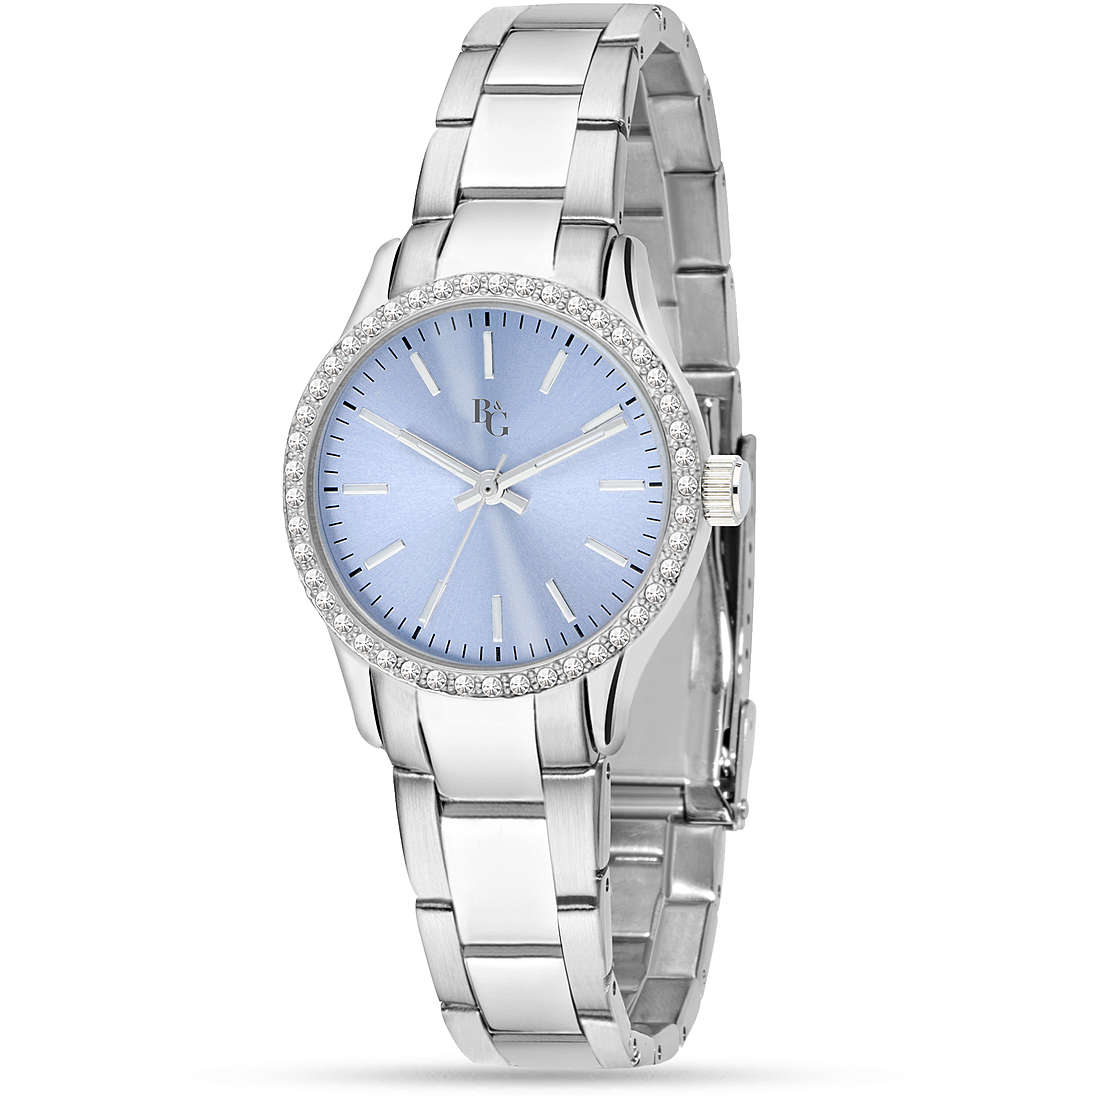 only time watch Metal Blue dial woman Luxury R3853241510